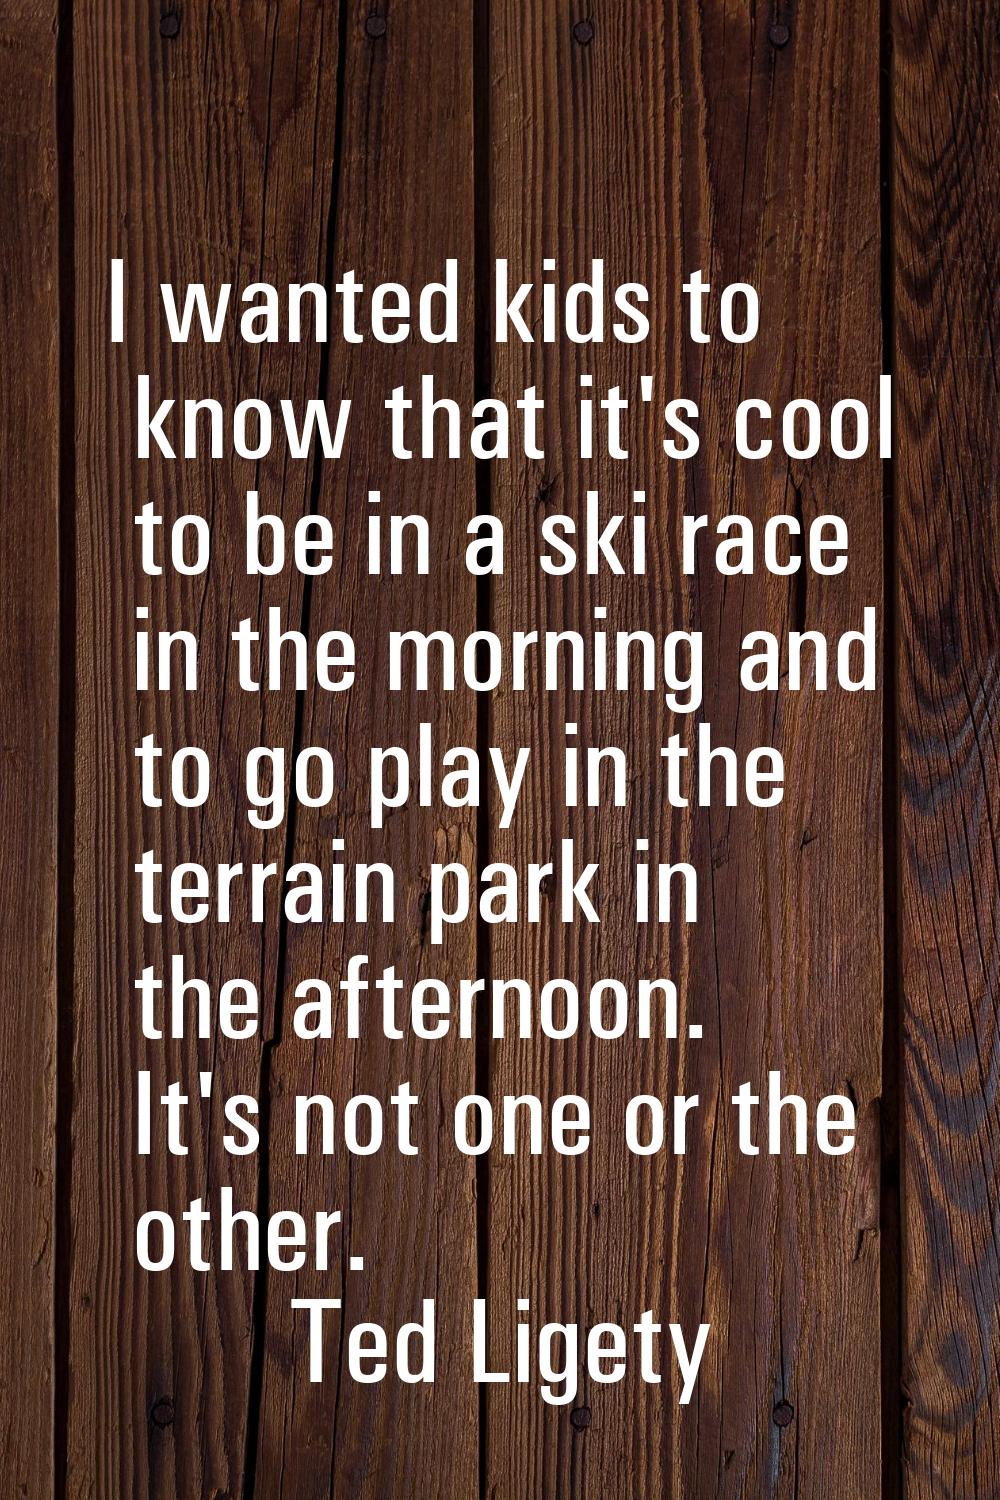 I wanted kids to know that it's cool to be in a ski race in the morning and to go play in the terra